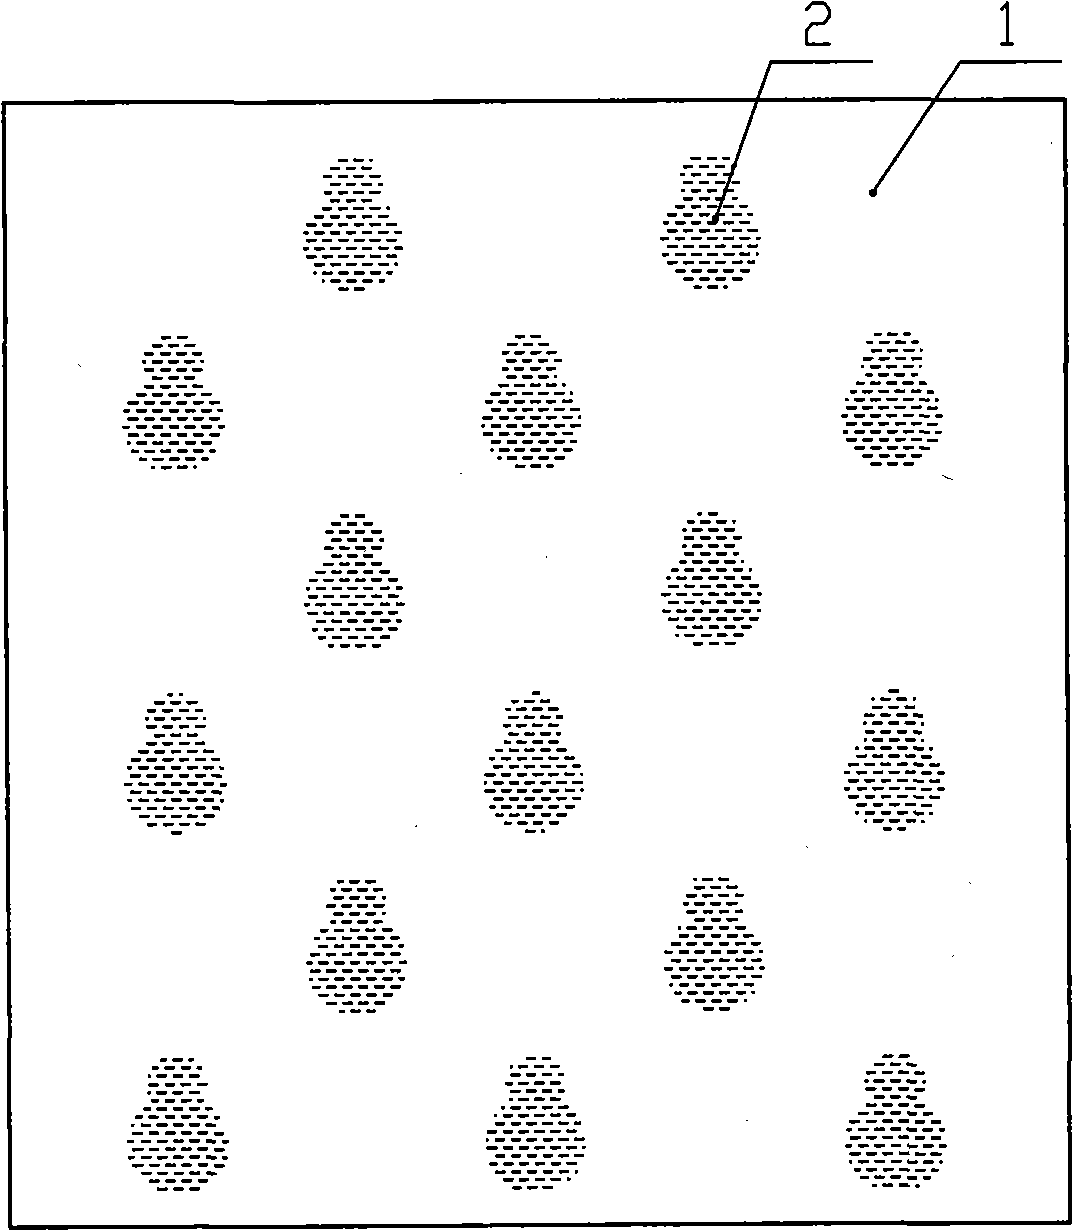 Cutting motif fabric and method of manufacture